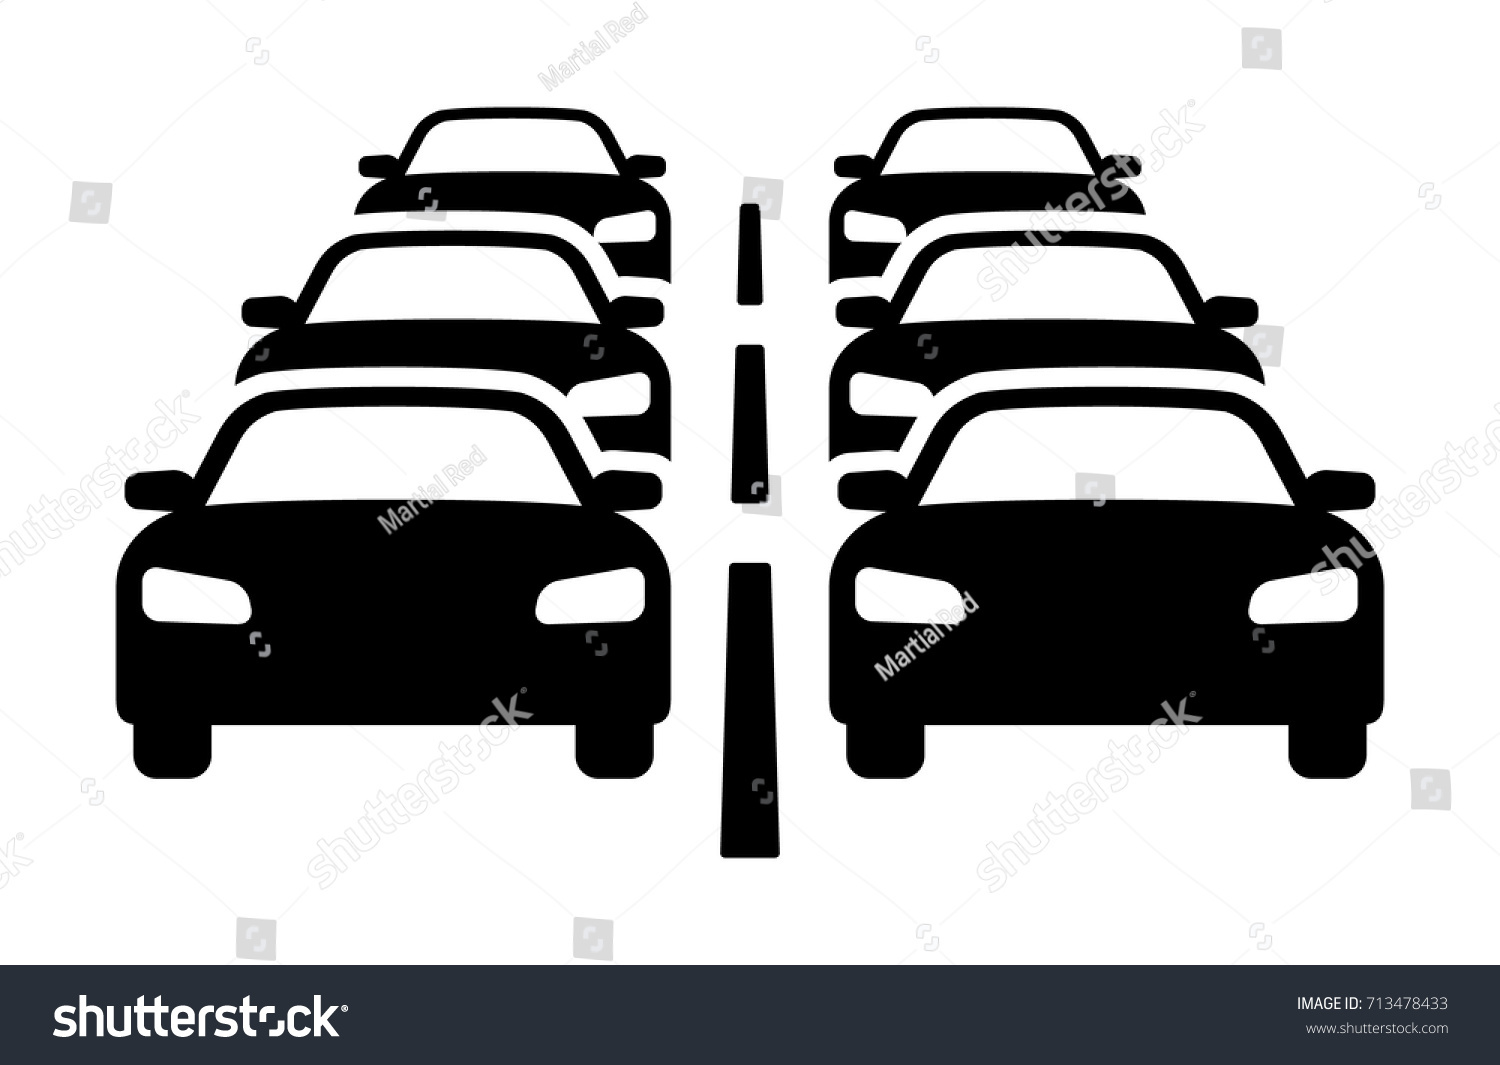 An image of a web traffic congestion icon. vectors illustration 